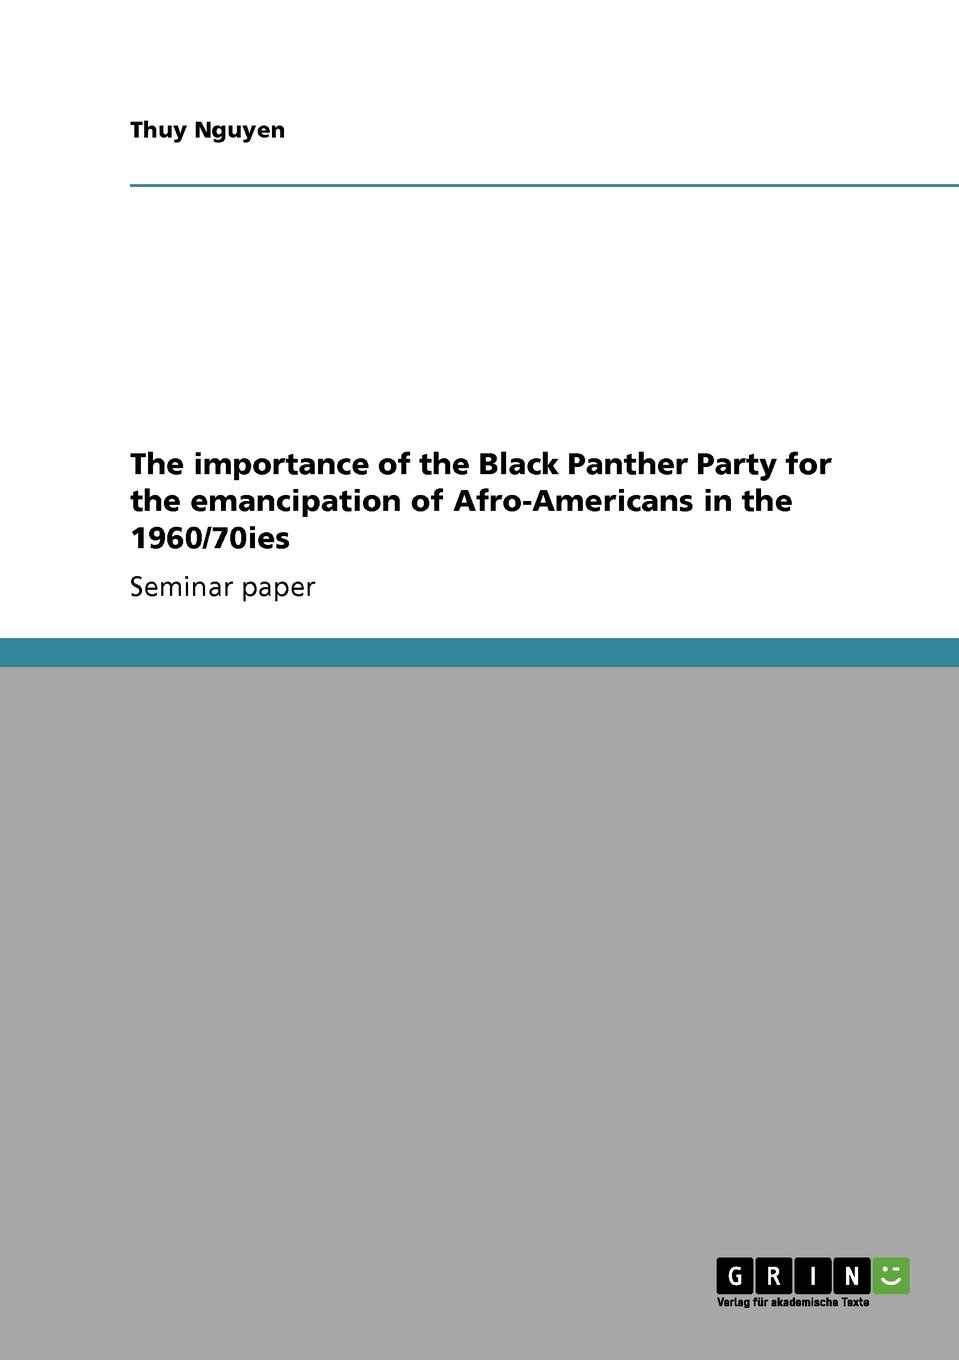 The importance of the Black Panther Party for the emancipation of Afro-Americans in the 1960/70ies